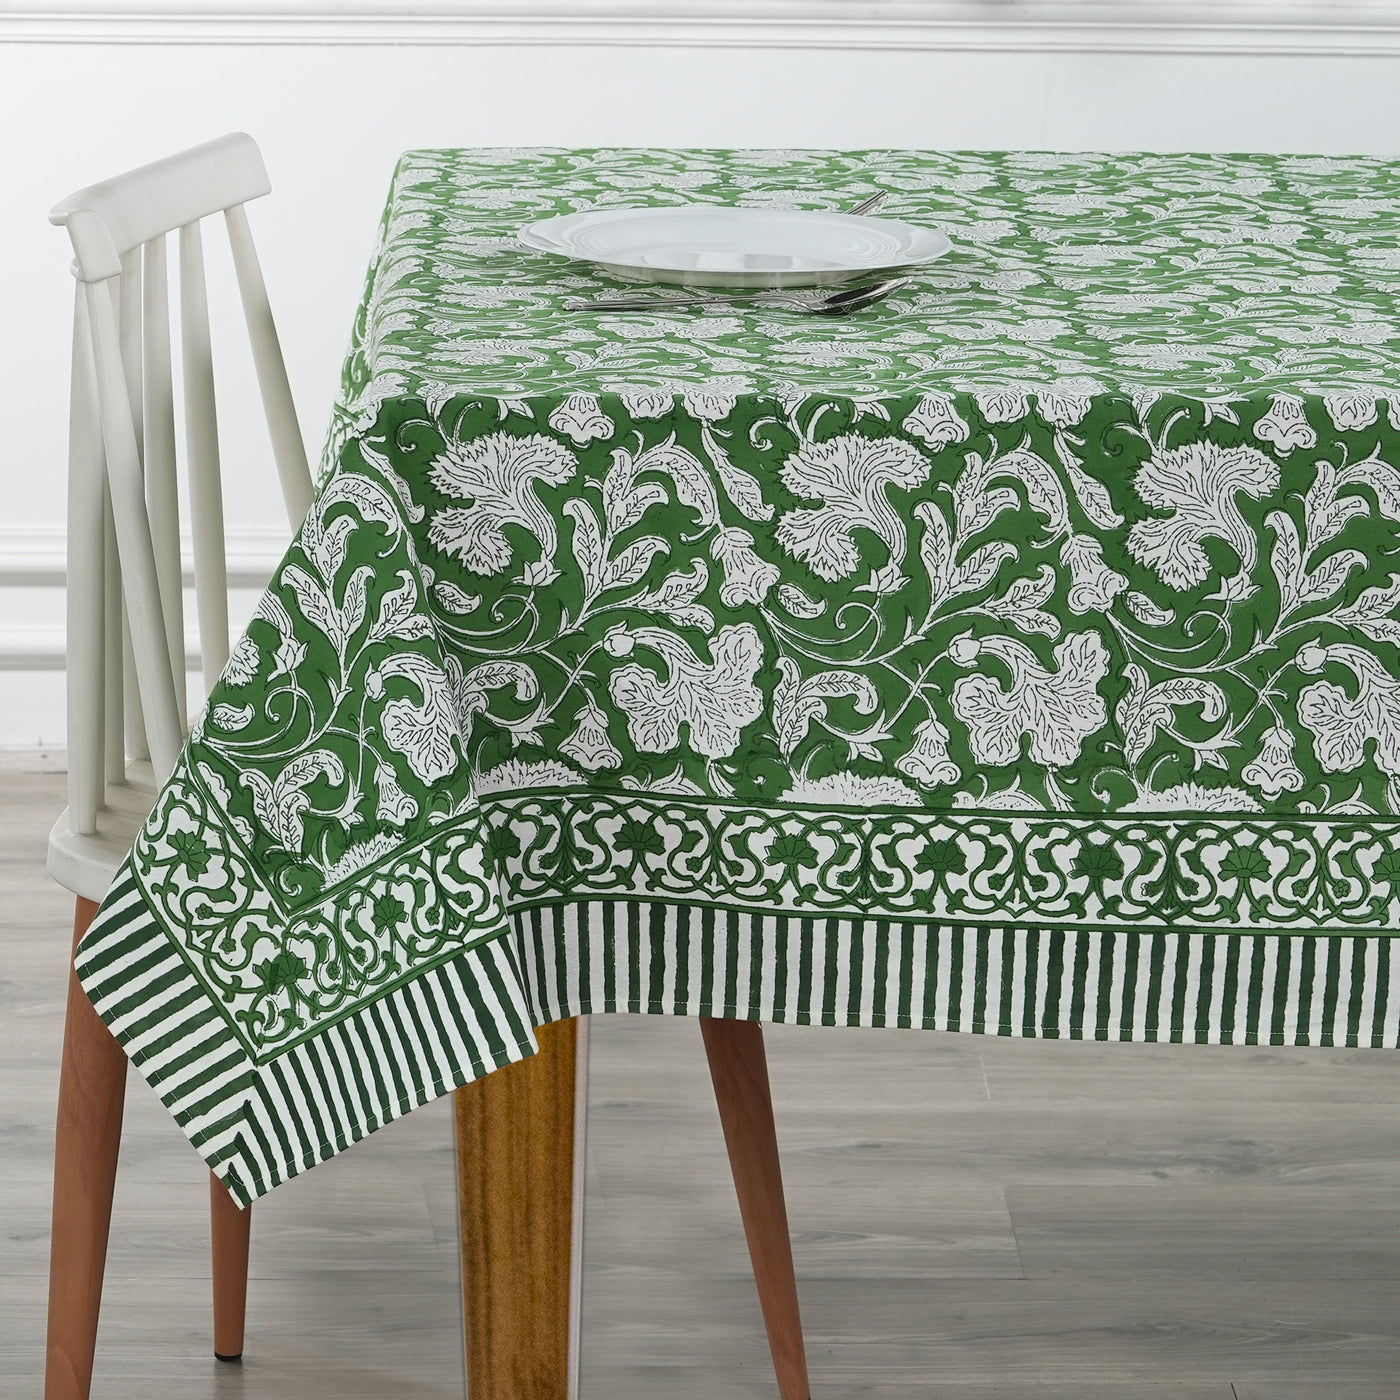 Fabricrush Pantone Artichoke Green, Pink and Yellow Indian Floral Hand Block Printed Cotton Cloth Tablecloth, Table Cover, Farmhouse Wedding Events Home Party